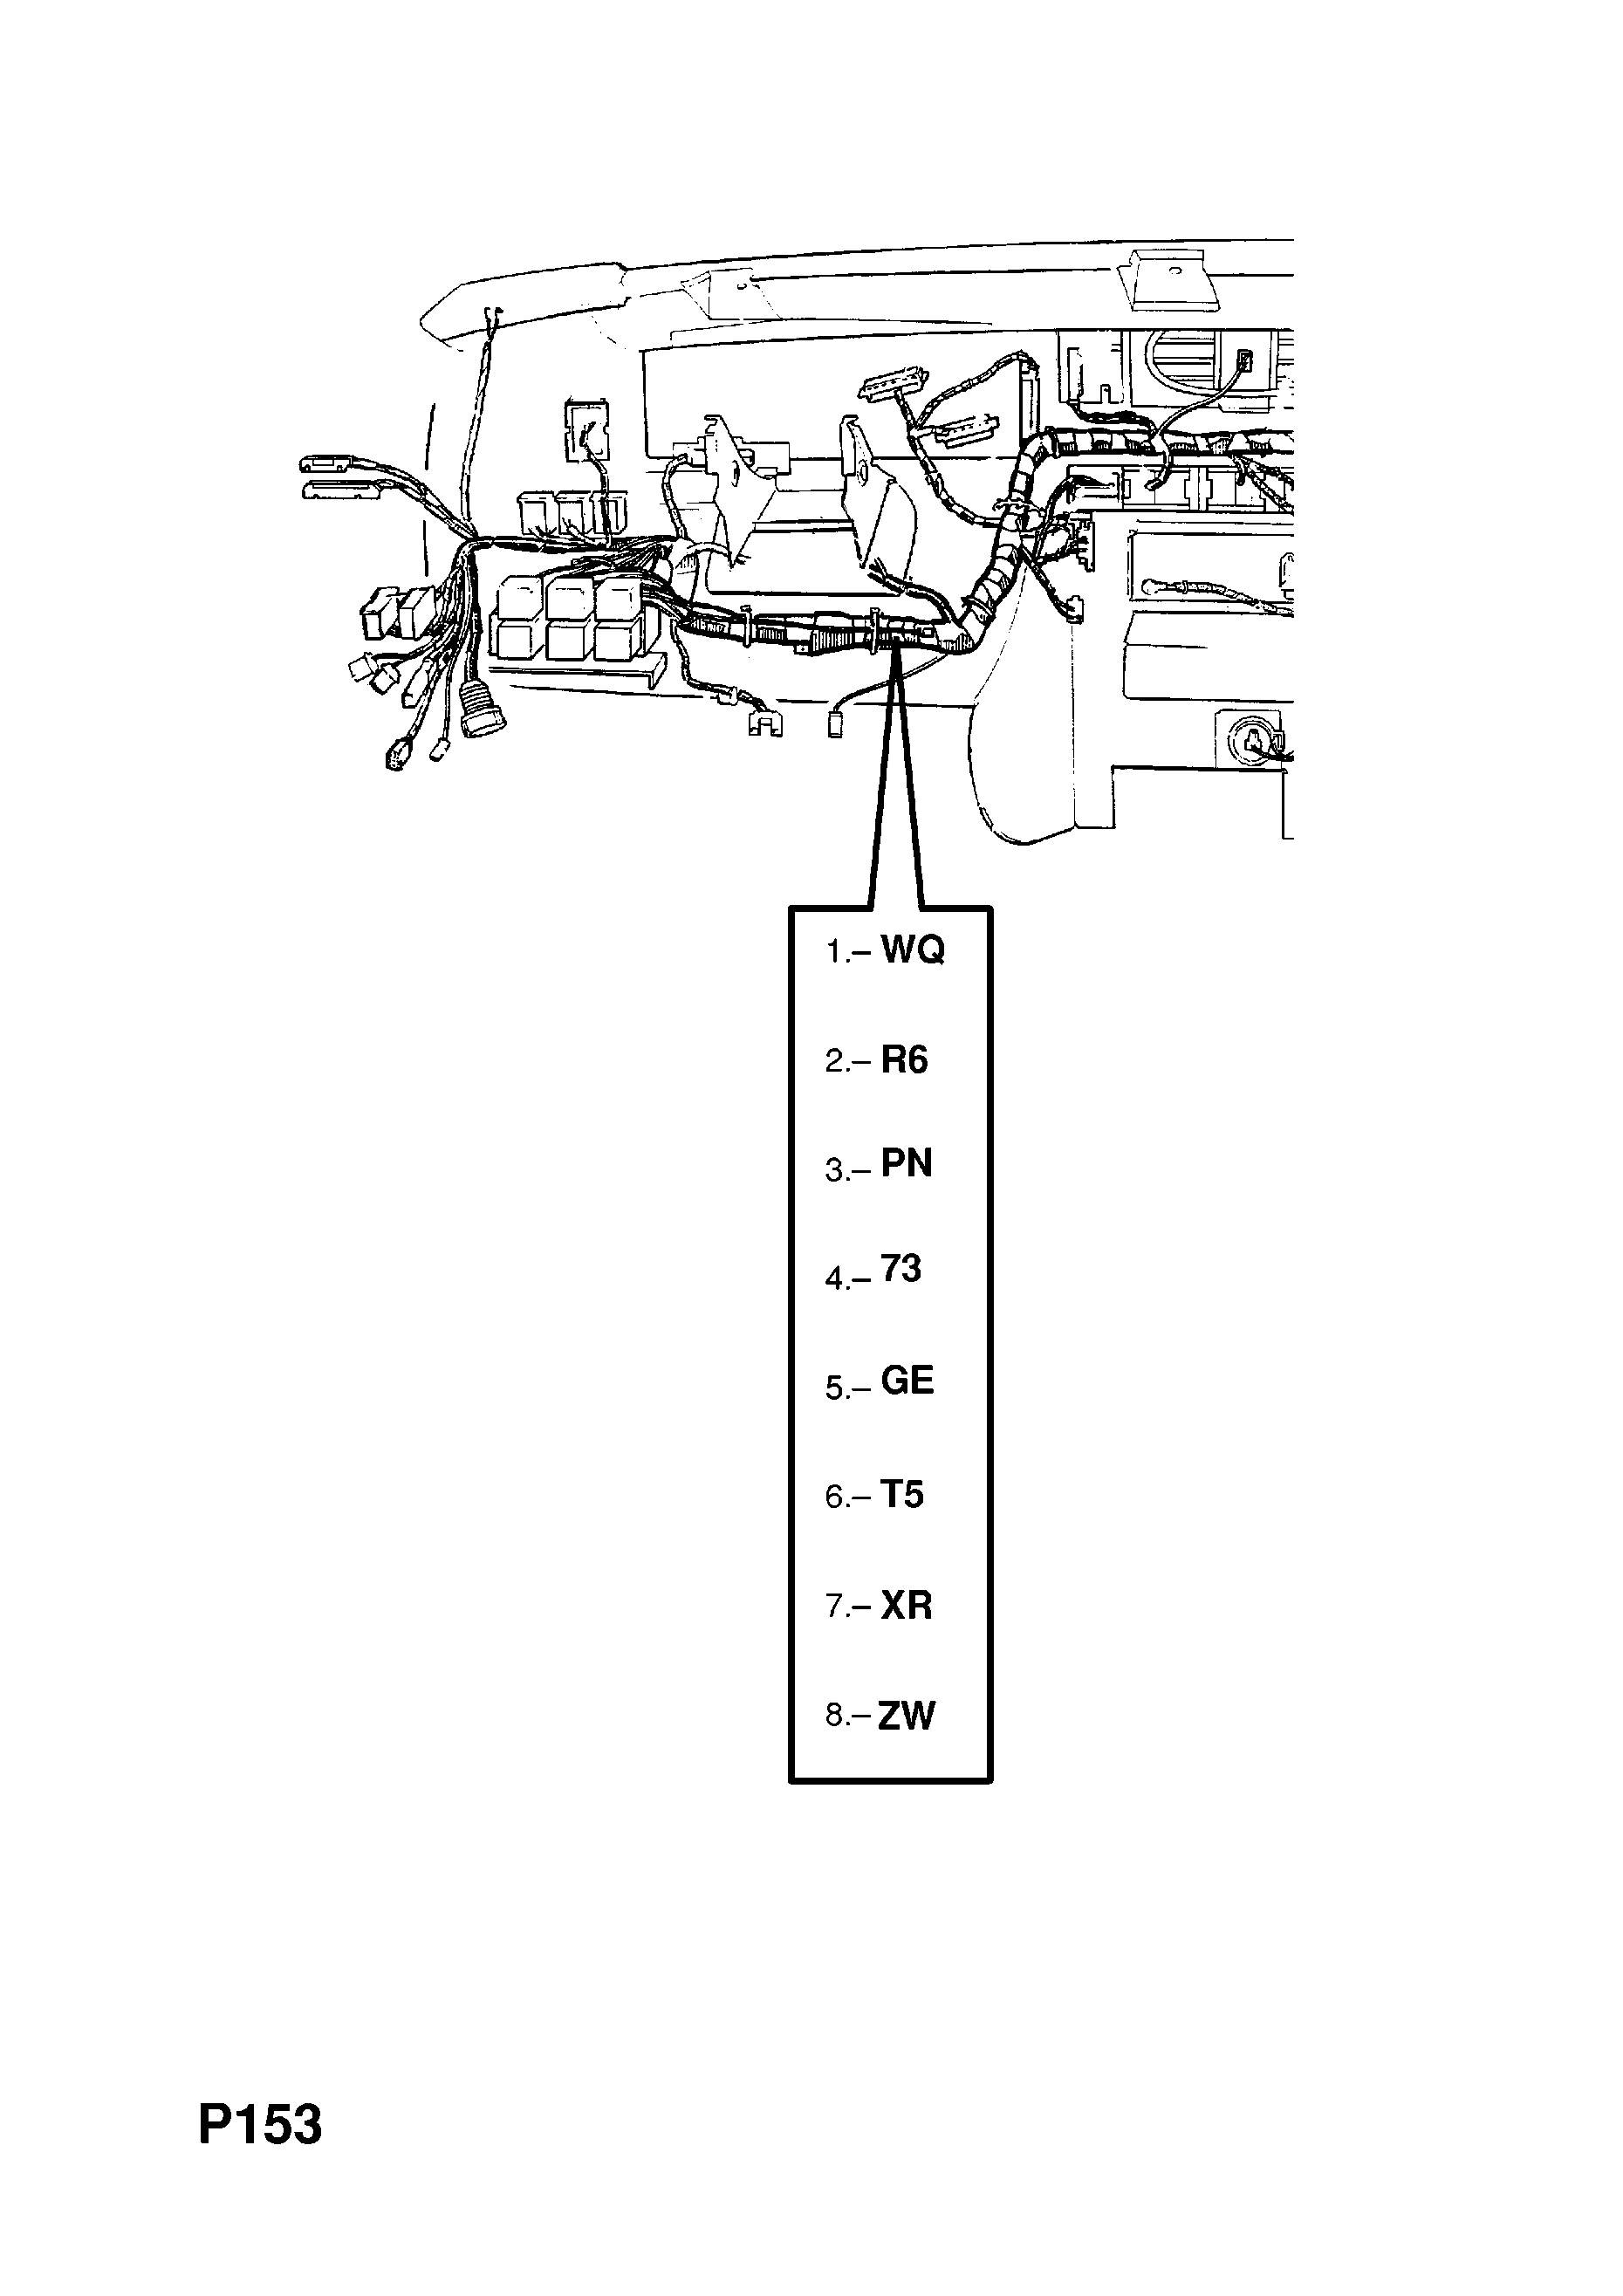 INSTRUMENT PANEL WIRING HARNESS (CONTD.) <small><i>[M1000001 (CONTD.) FOR AIR CONDITIONING, MANUAL TRANSMISSION AND LCD INSTRUMENTS (CONTD.)]</i></small>